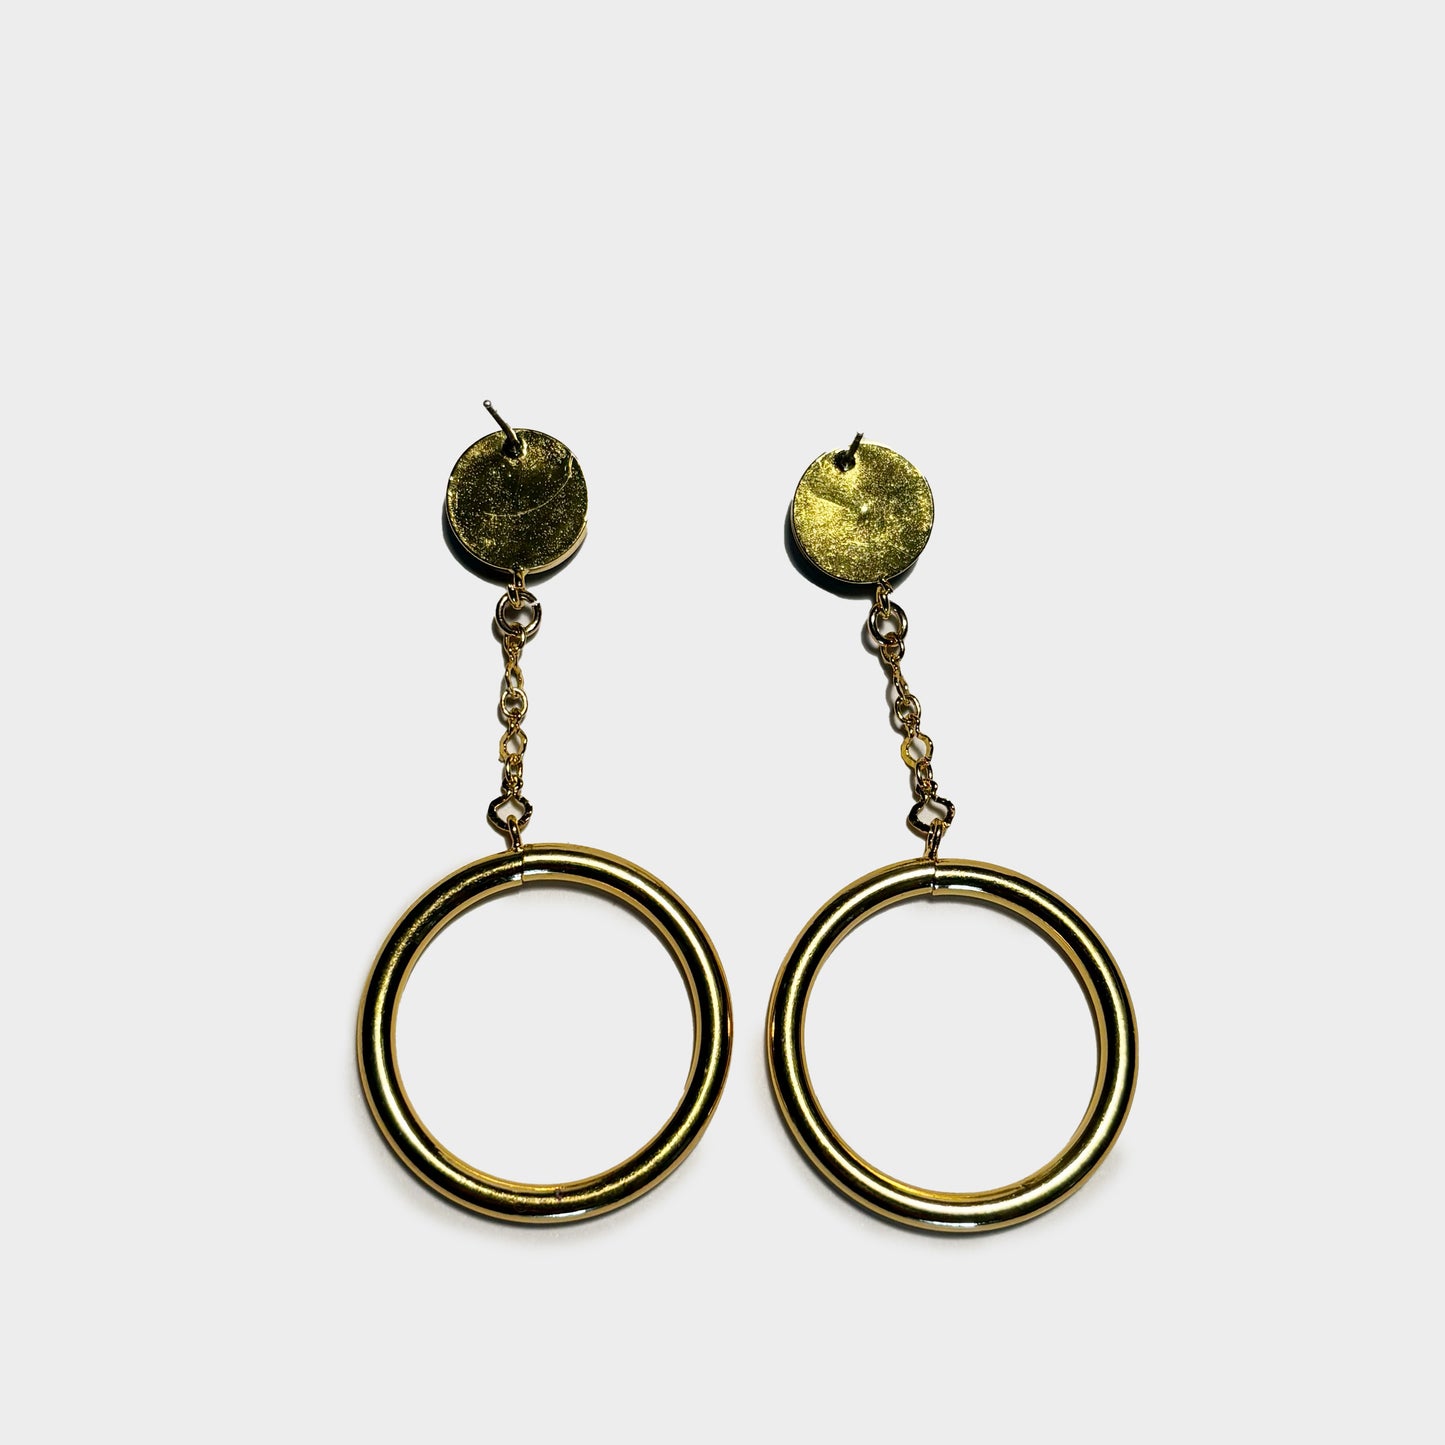 Vintage Green and Gold Dangle Earrings